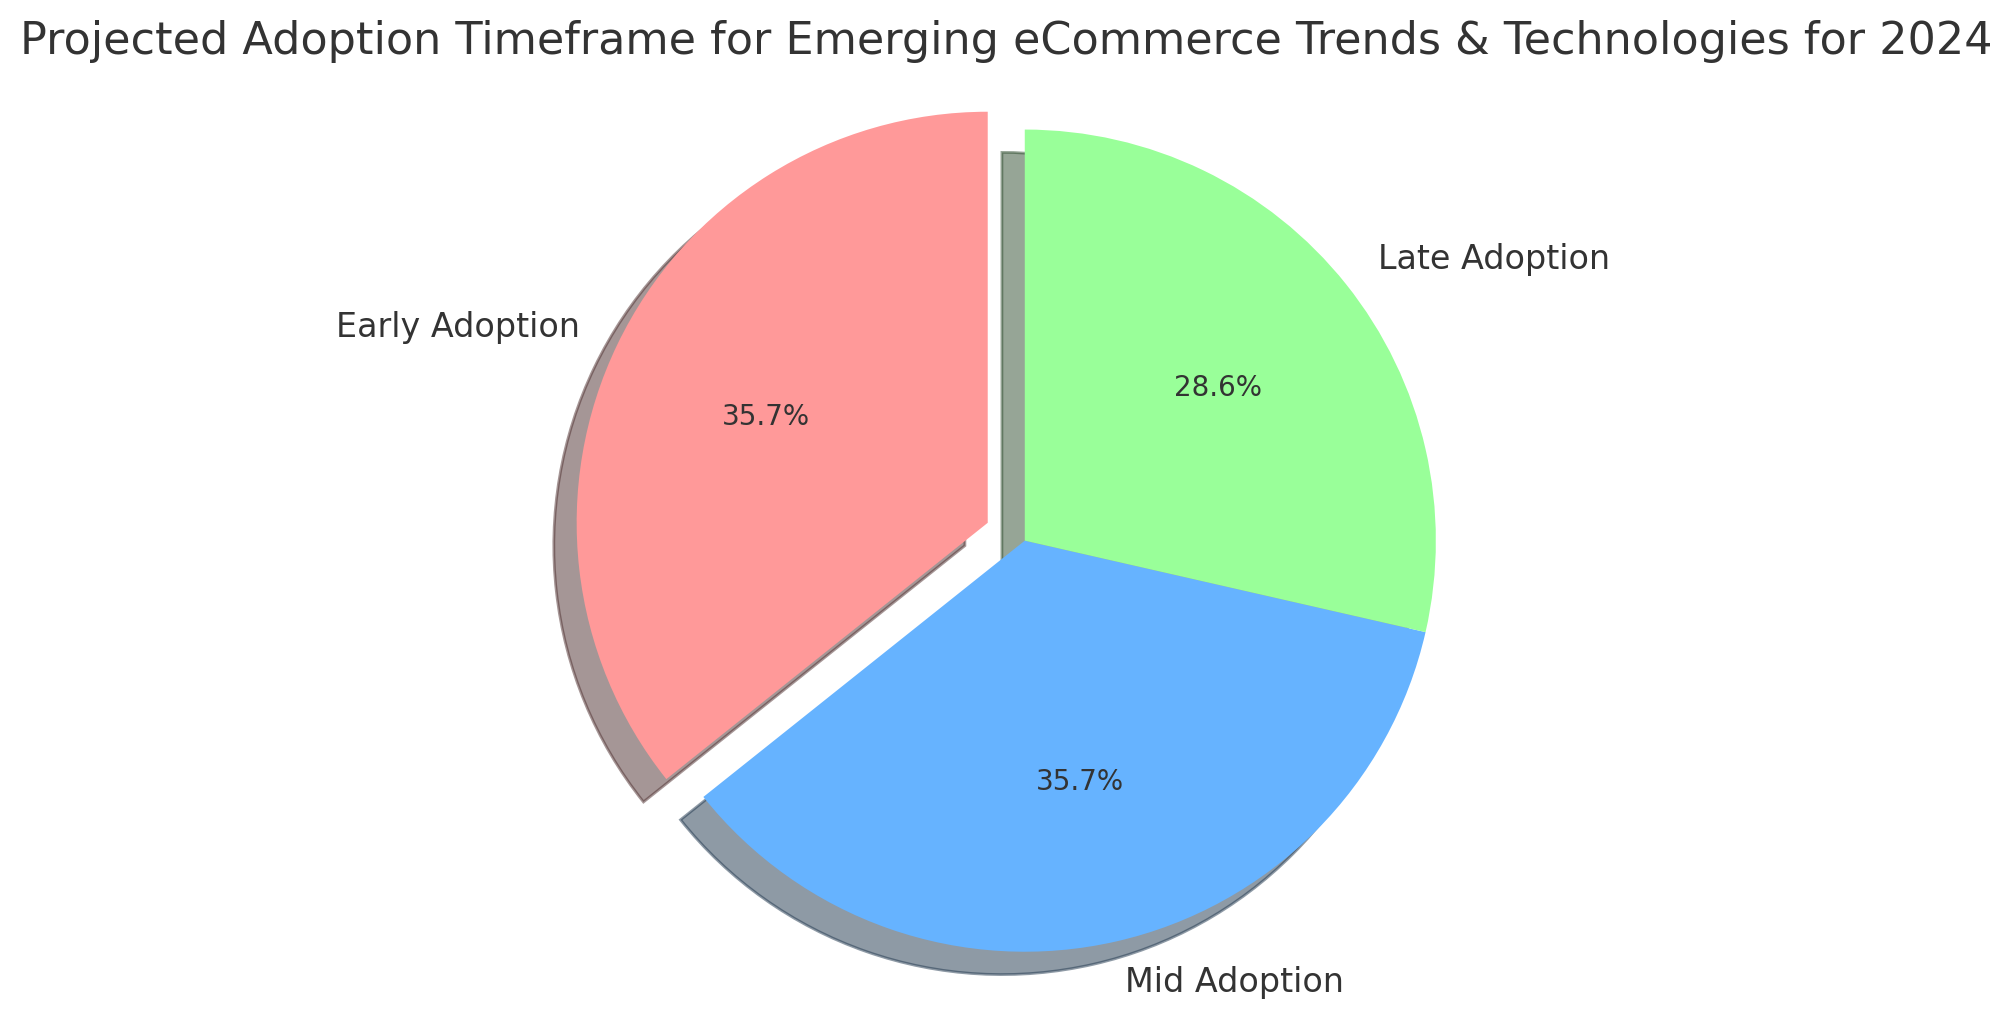 Projected Impact of eCommerce Trends